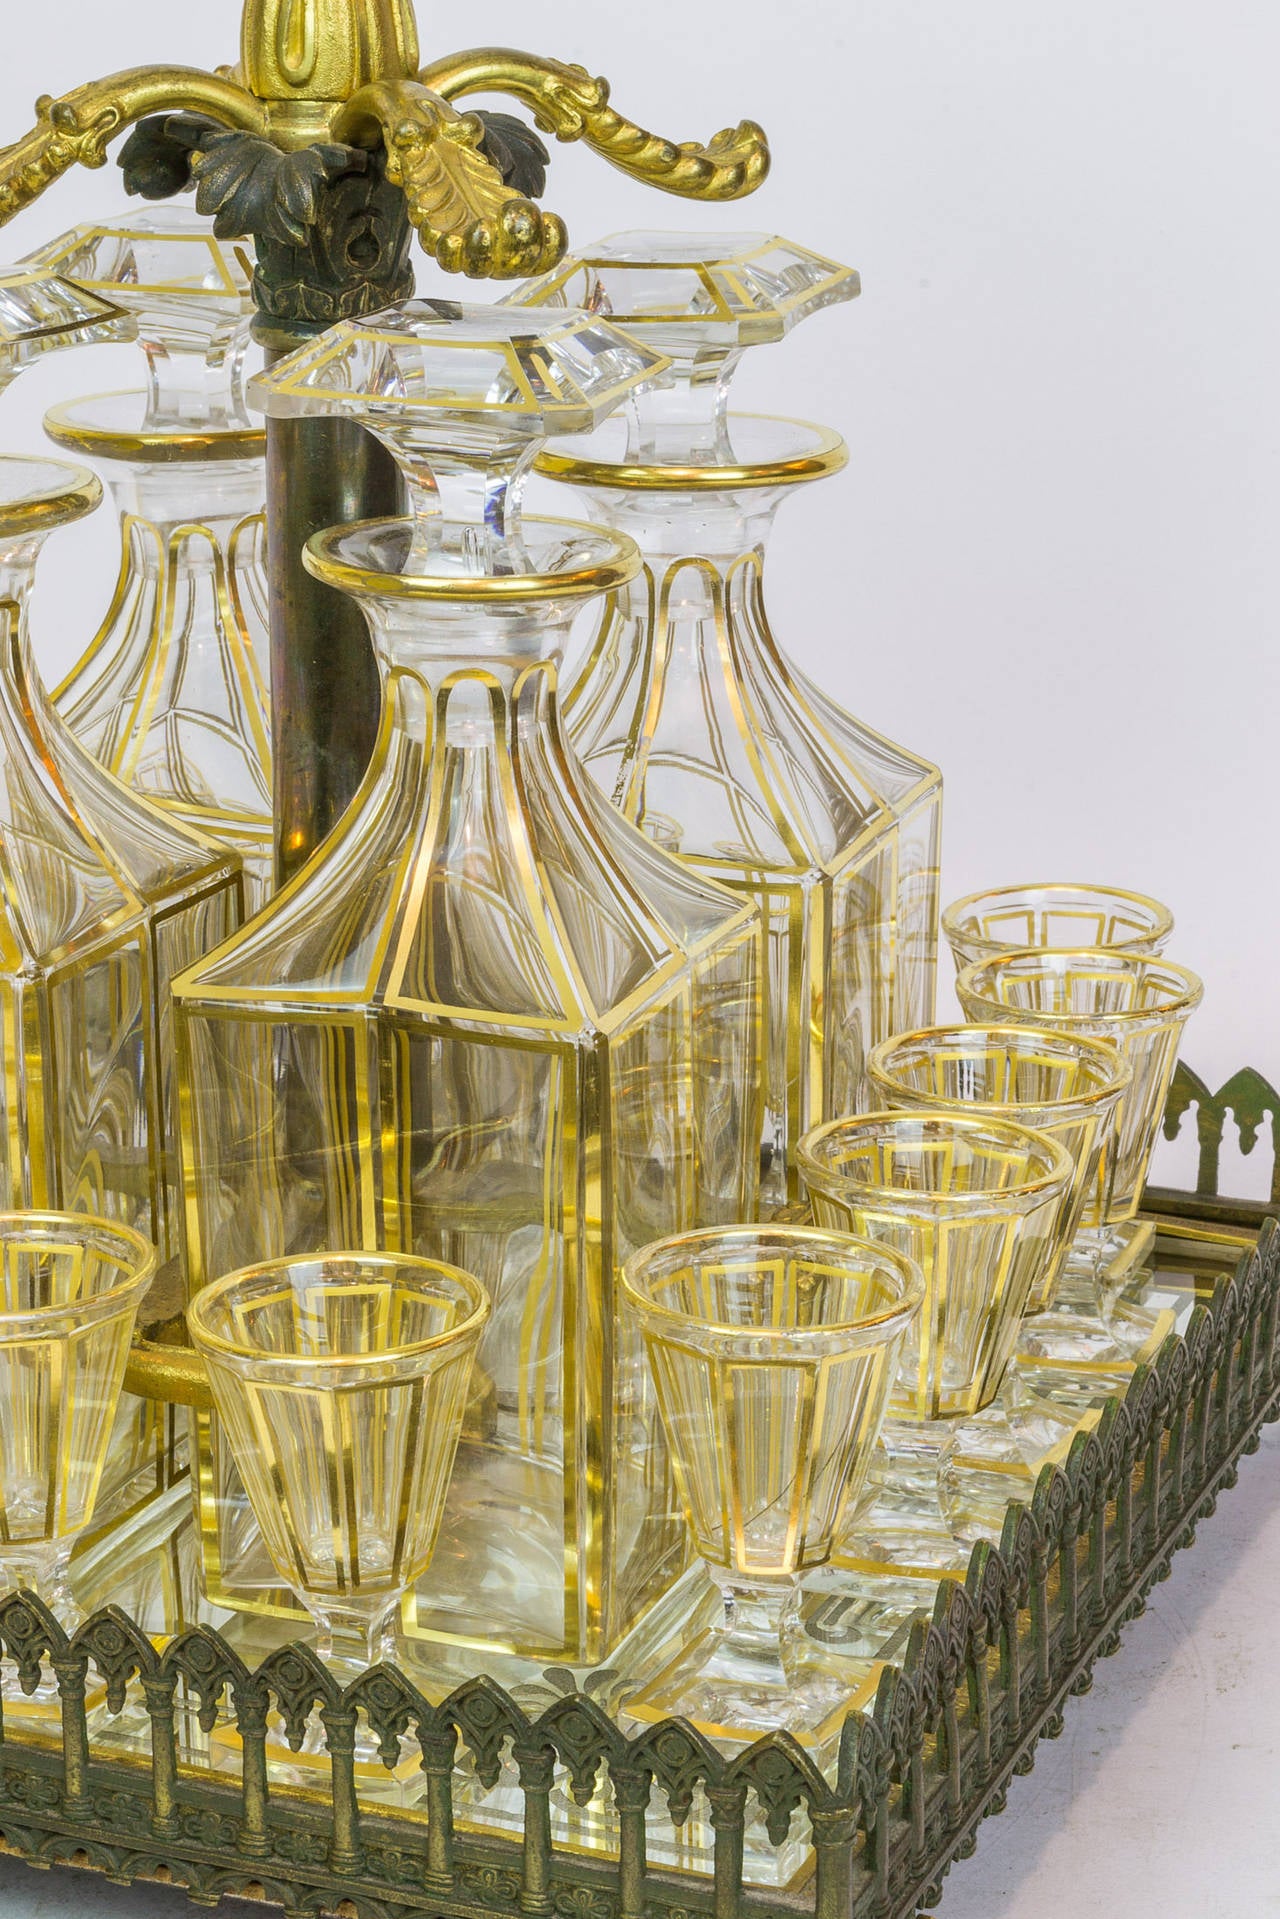 A Fantastic 19th Century French Baccarat Style Crystal and Gilt Bronze Tantalus Mirrored Stand Liquor Set
Stock Number: G3